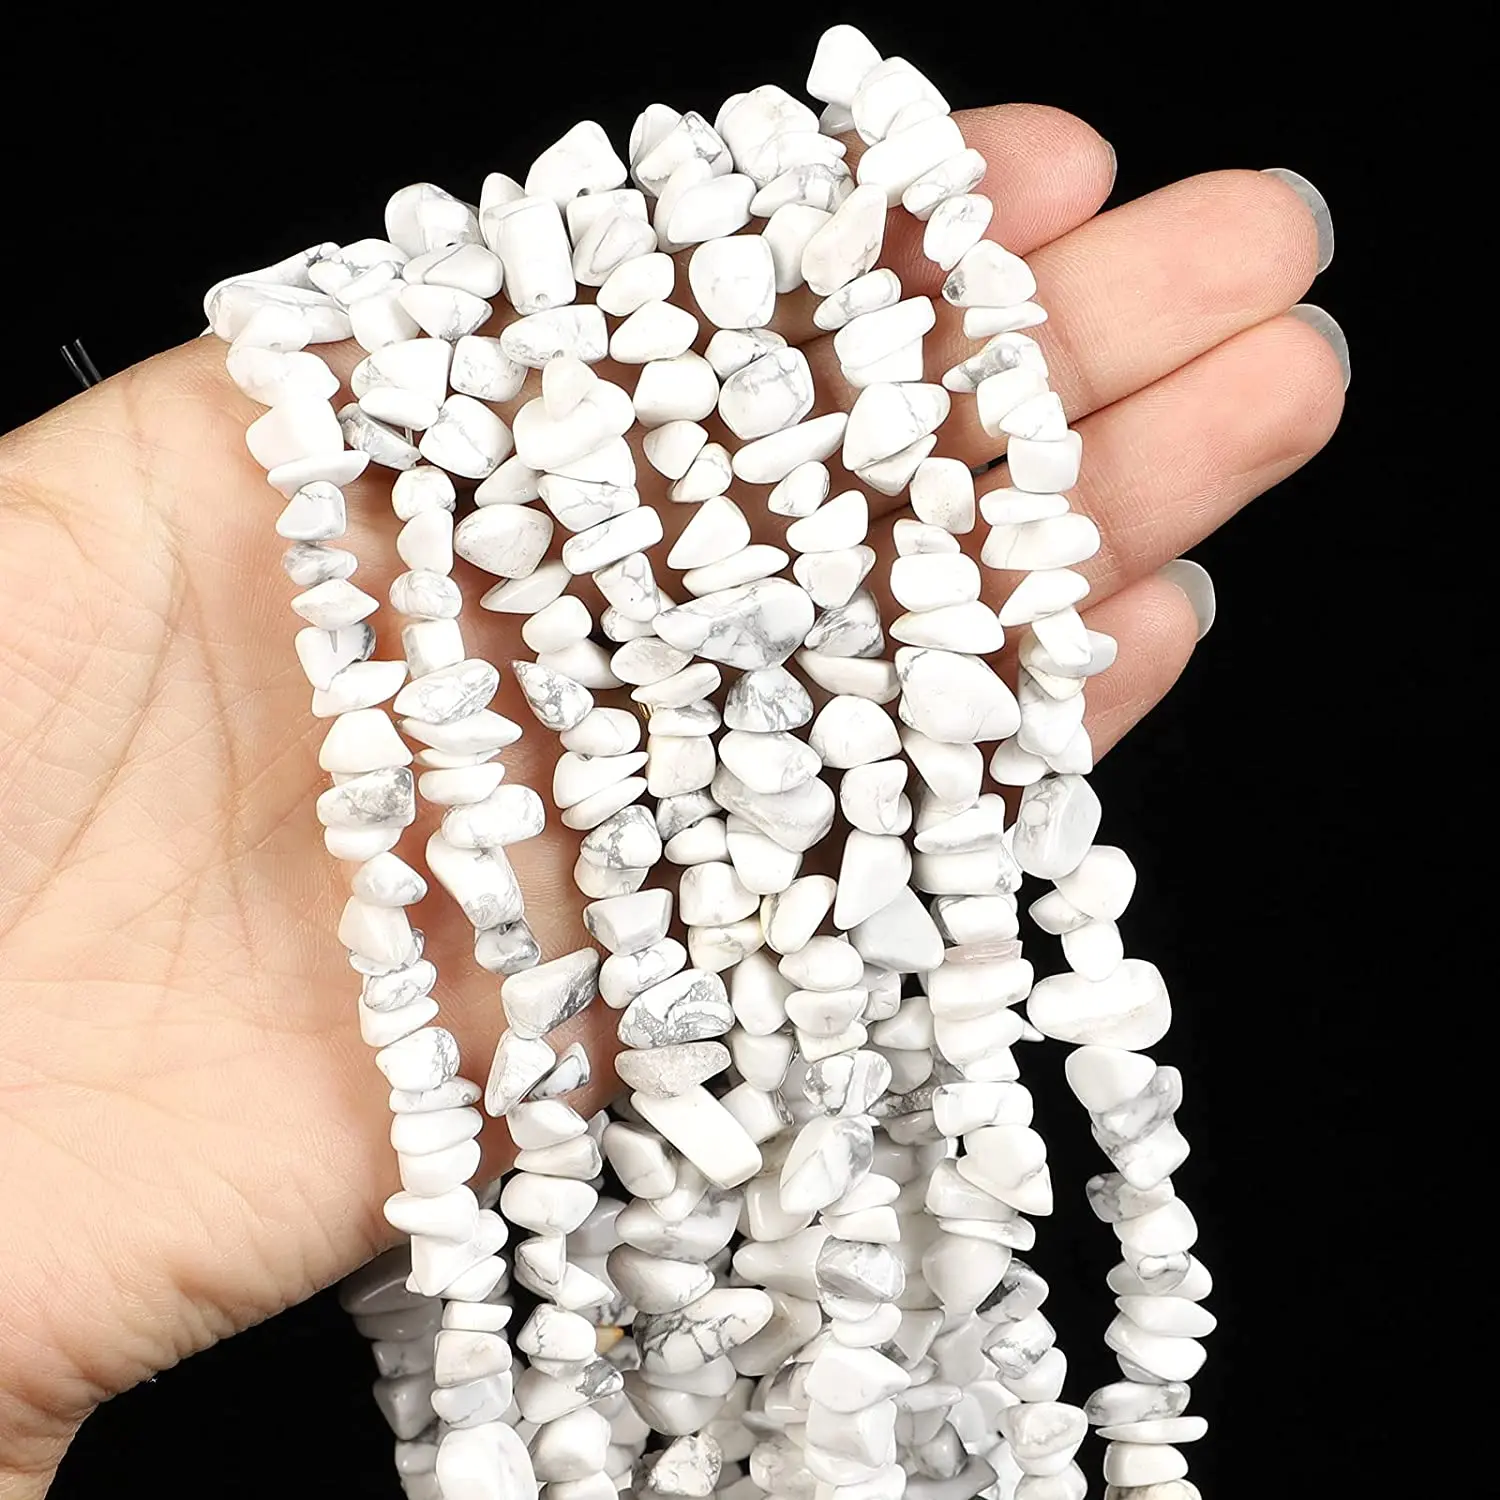 

Hot Sales Howlite Gemstone Beads,Natural Chips Assorted Loose Beads, Healing Crystal Energy Stone for Jewelry Making